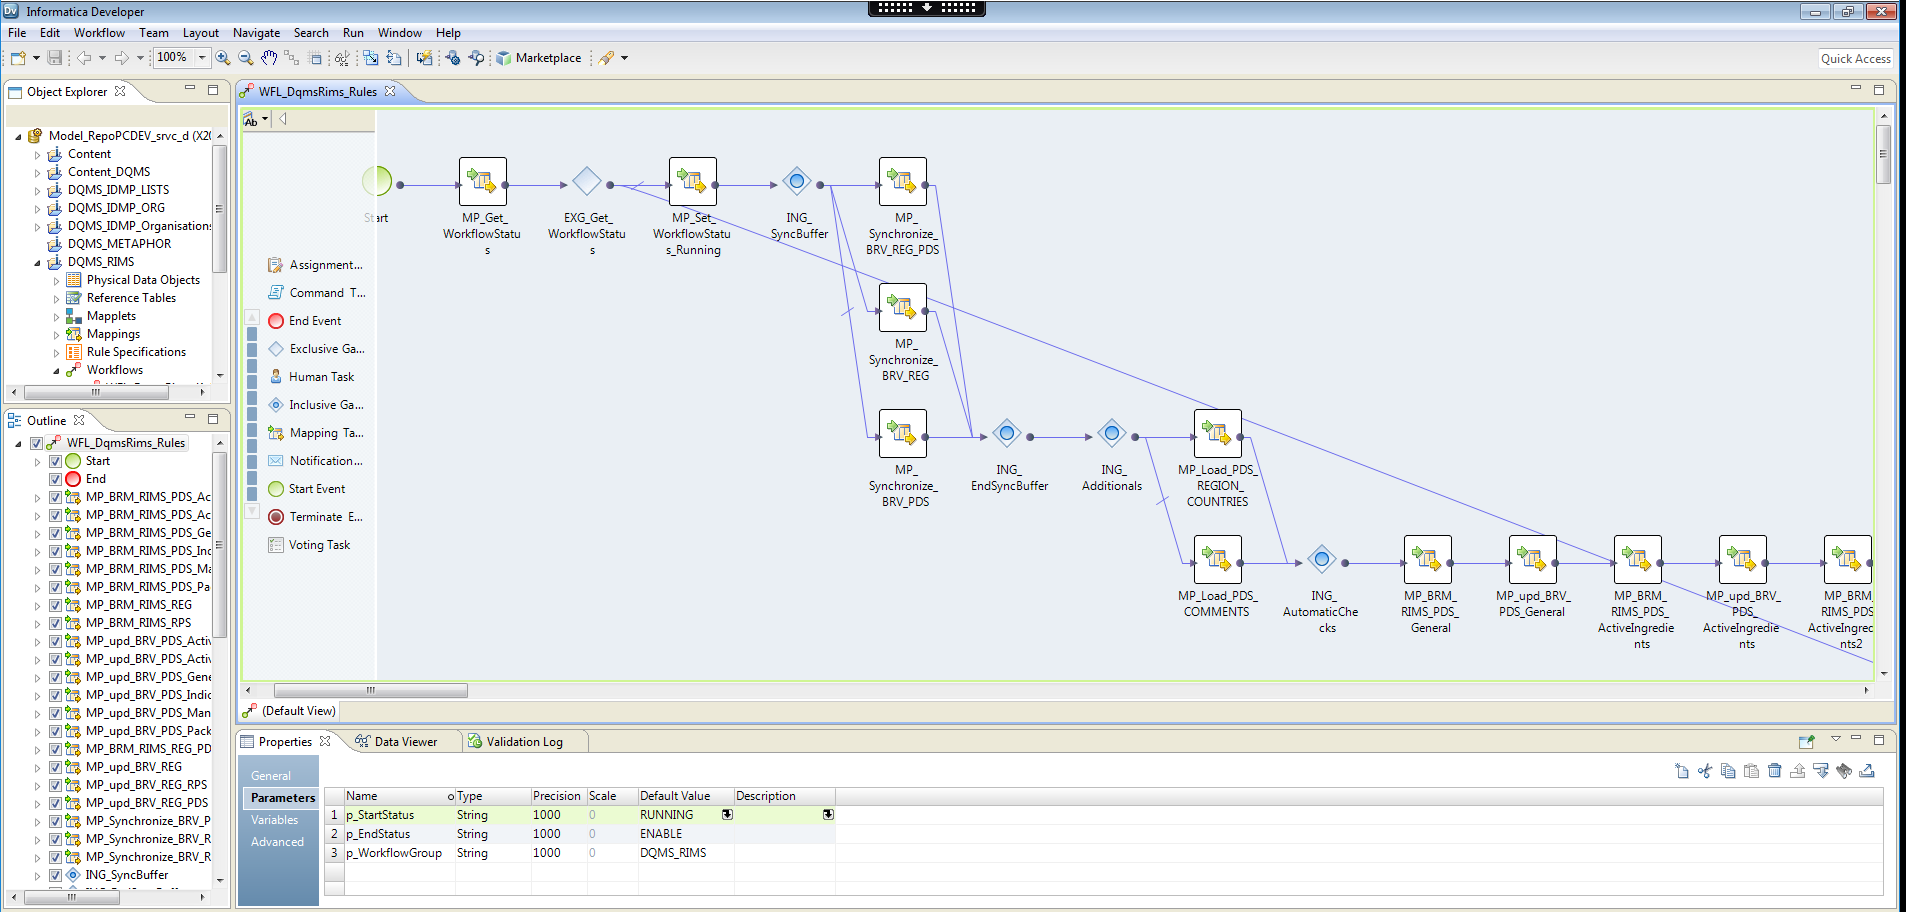 Designing a mapping in Informatica Developer